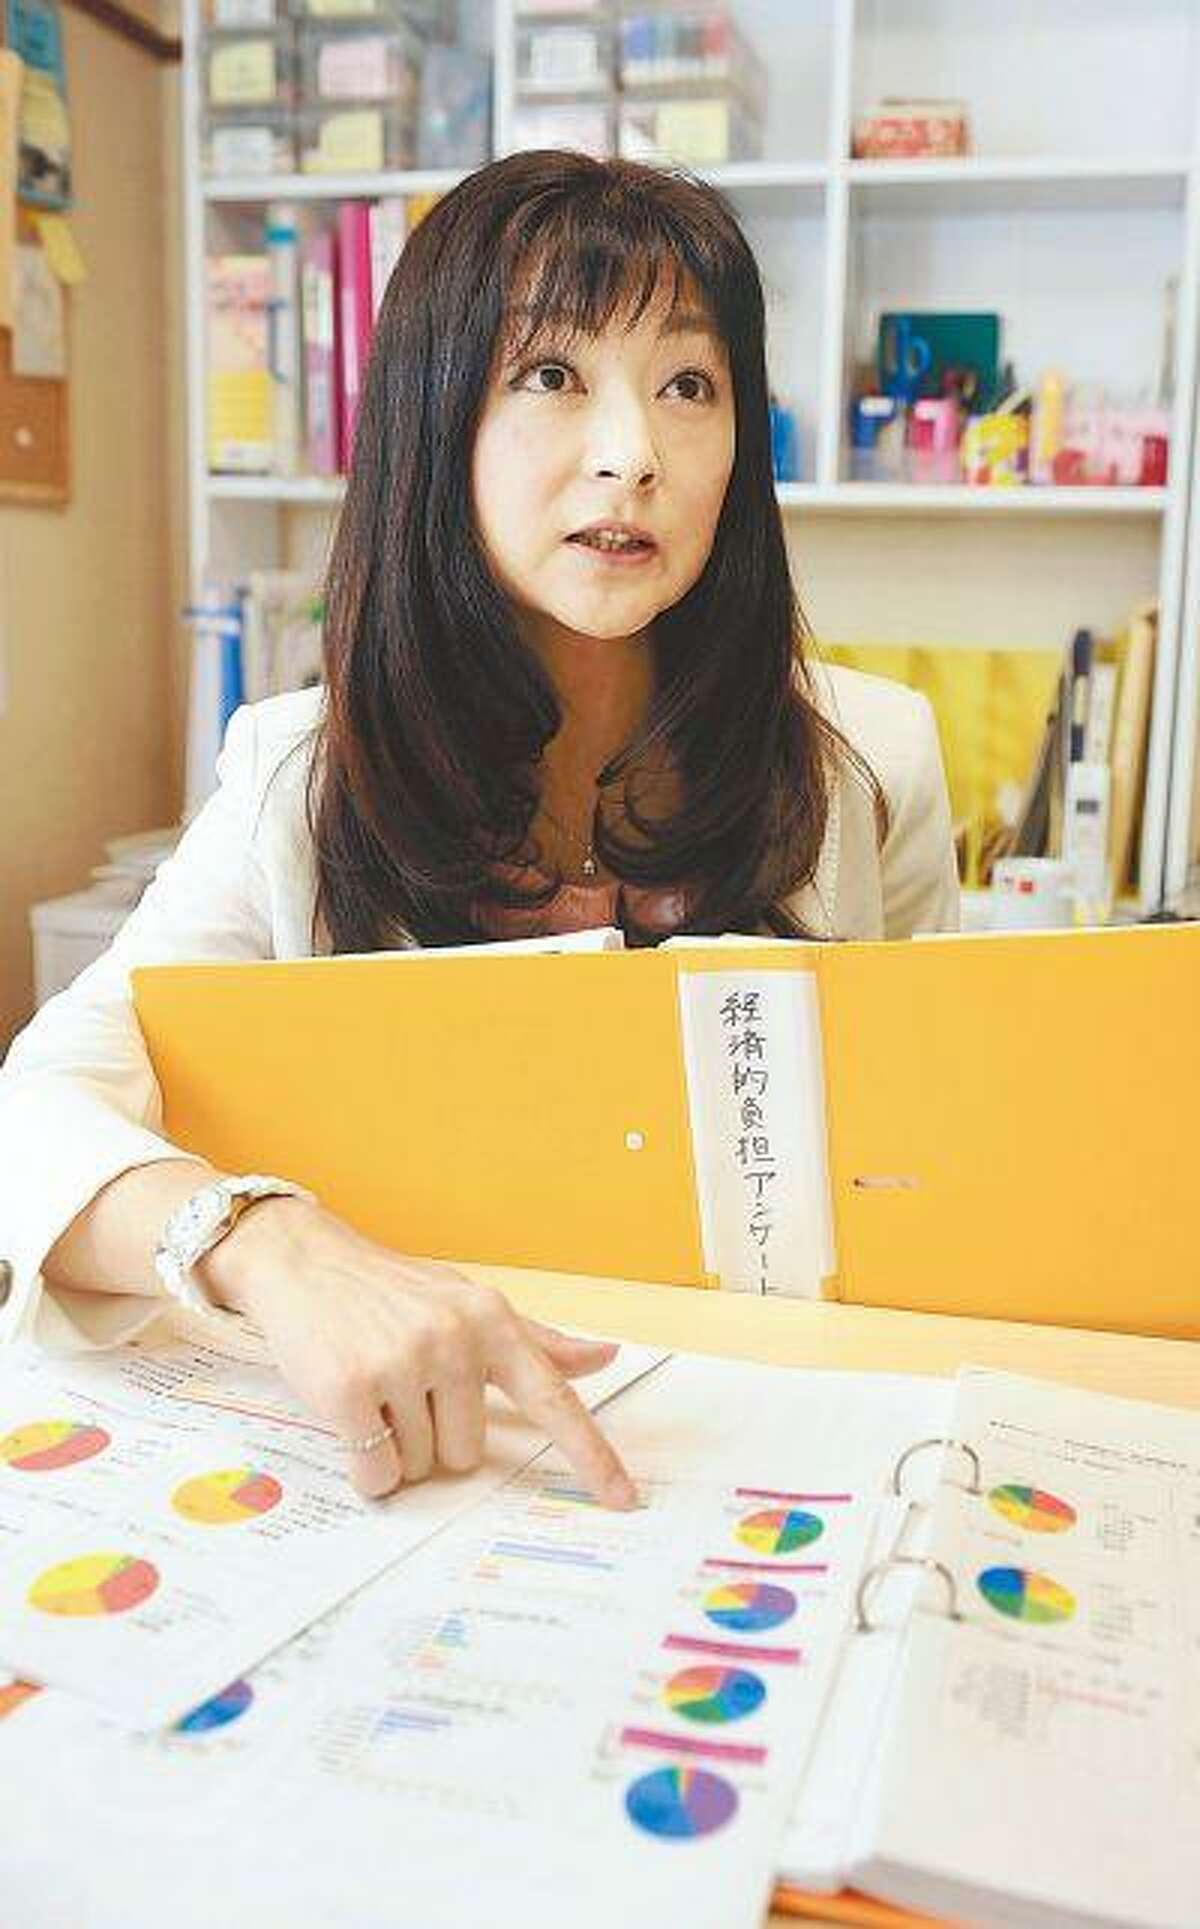 Many people have to quit their job due to difficulties in working and receiving the treatment at the same time, says Akiko Matsumoto, president of Fine, a Tokyo-based nonprofit supporting people with fertility problems.